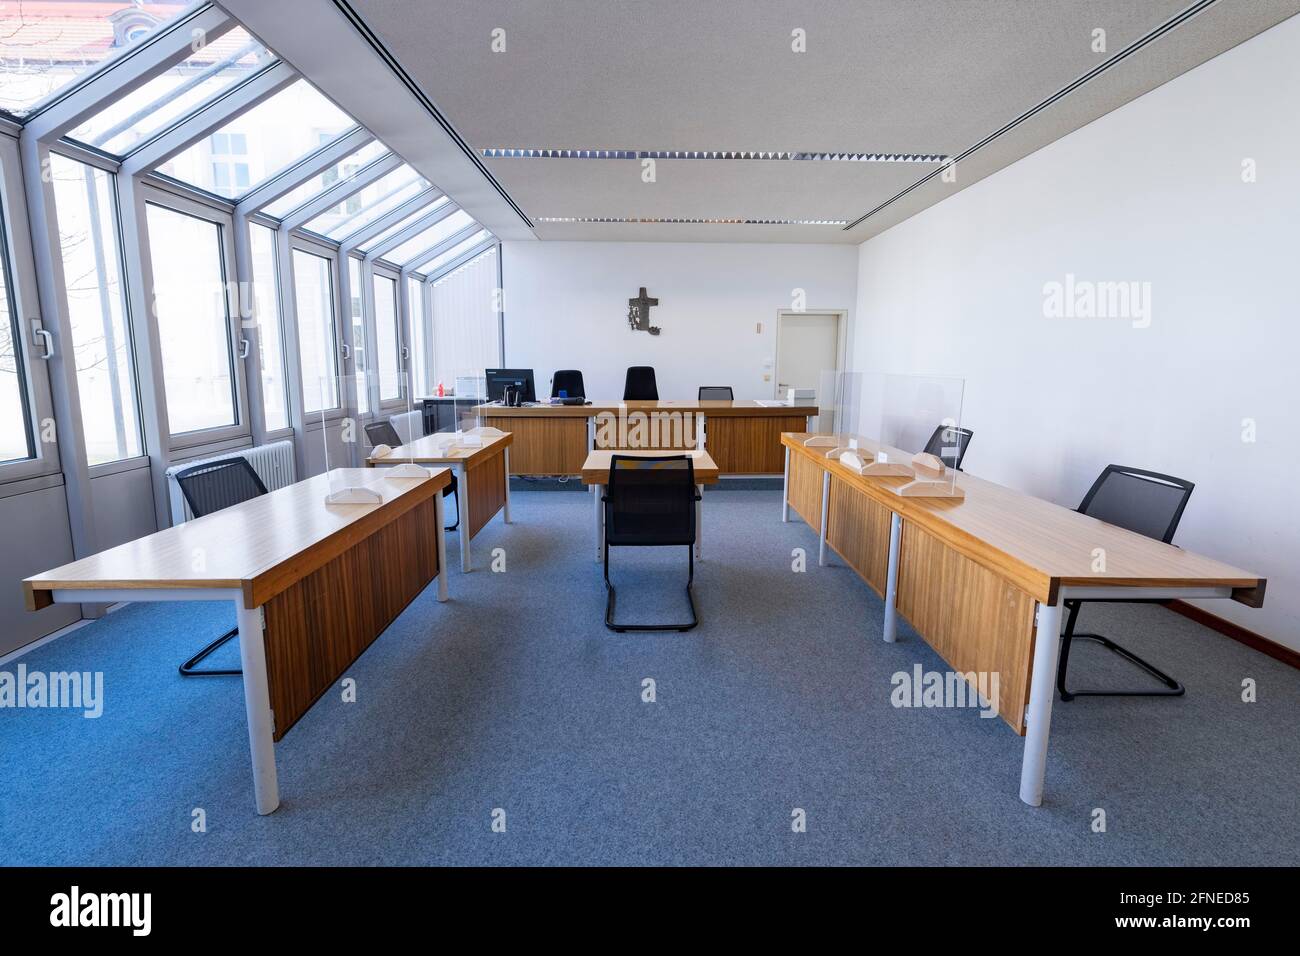 Courtroom 3 at the Erding Local Court, Bavaria, Germany Stock Photo